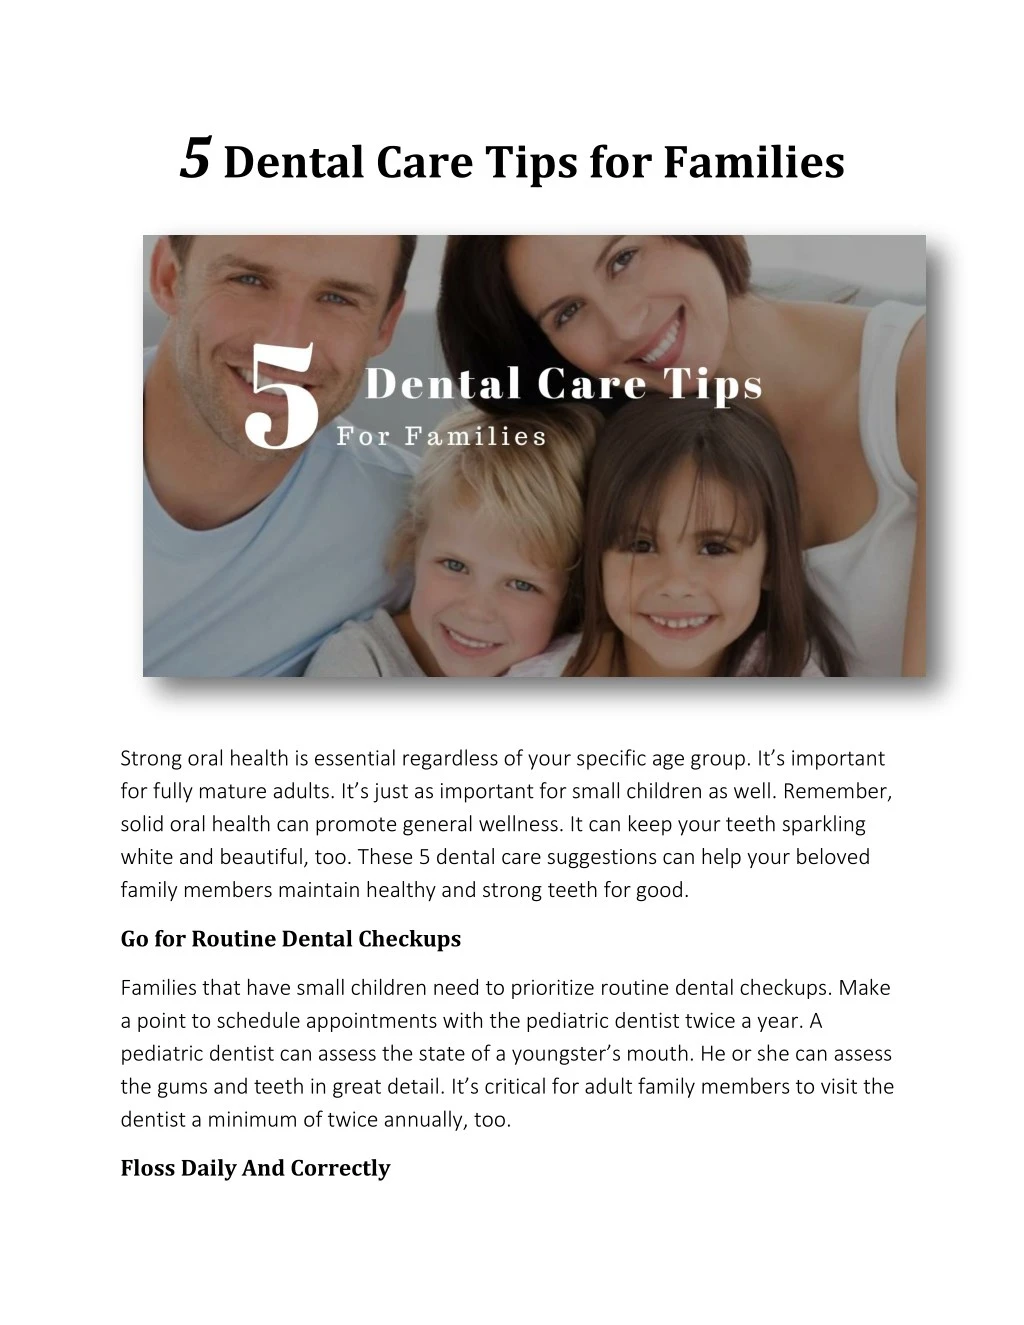 5 dental care tips for families